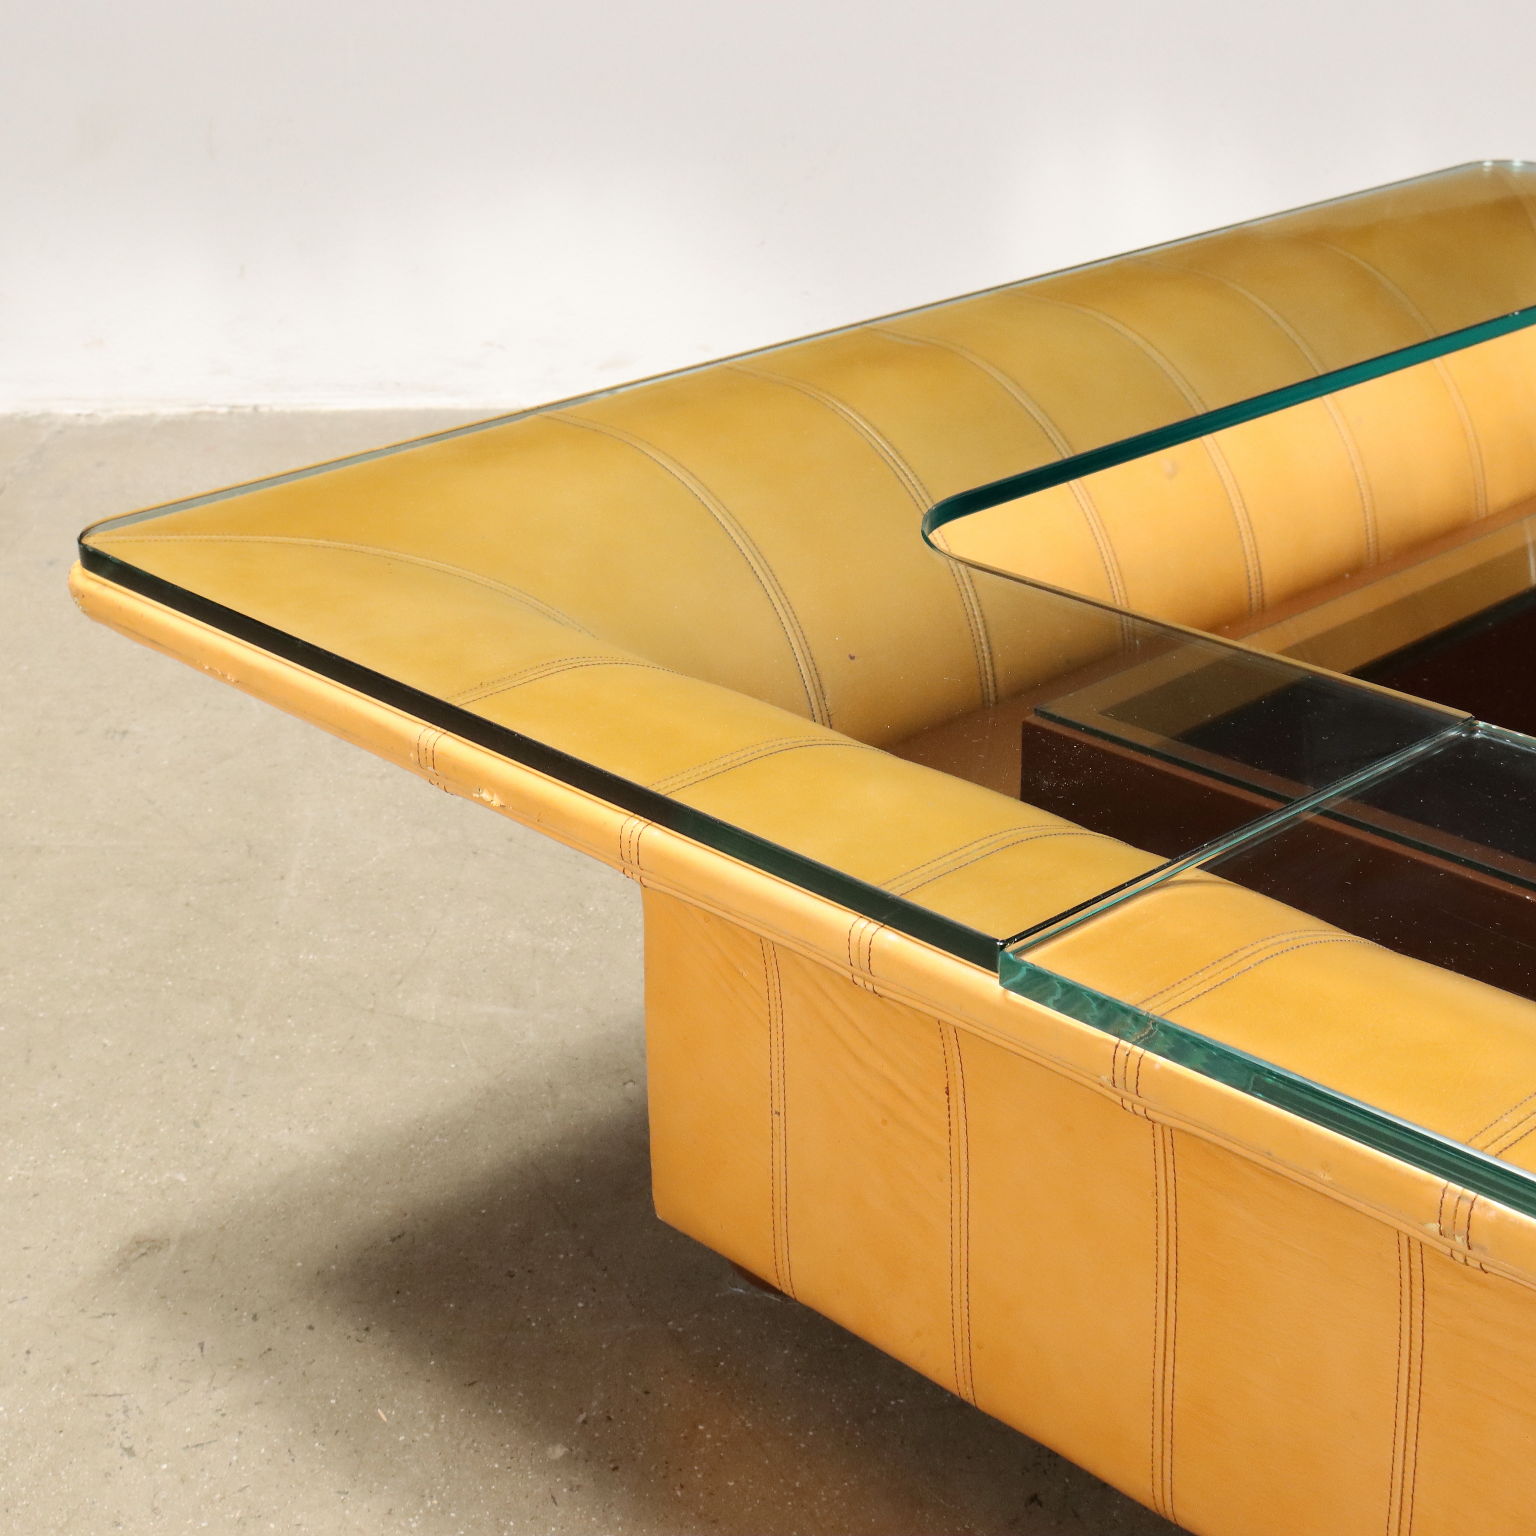 Vintage 1970s Coffee Table Lacquered Wood Glass Top Leather